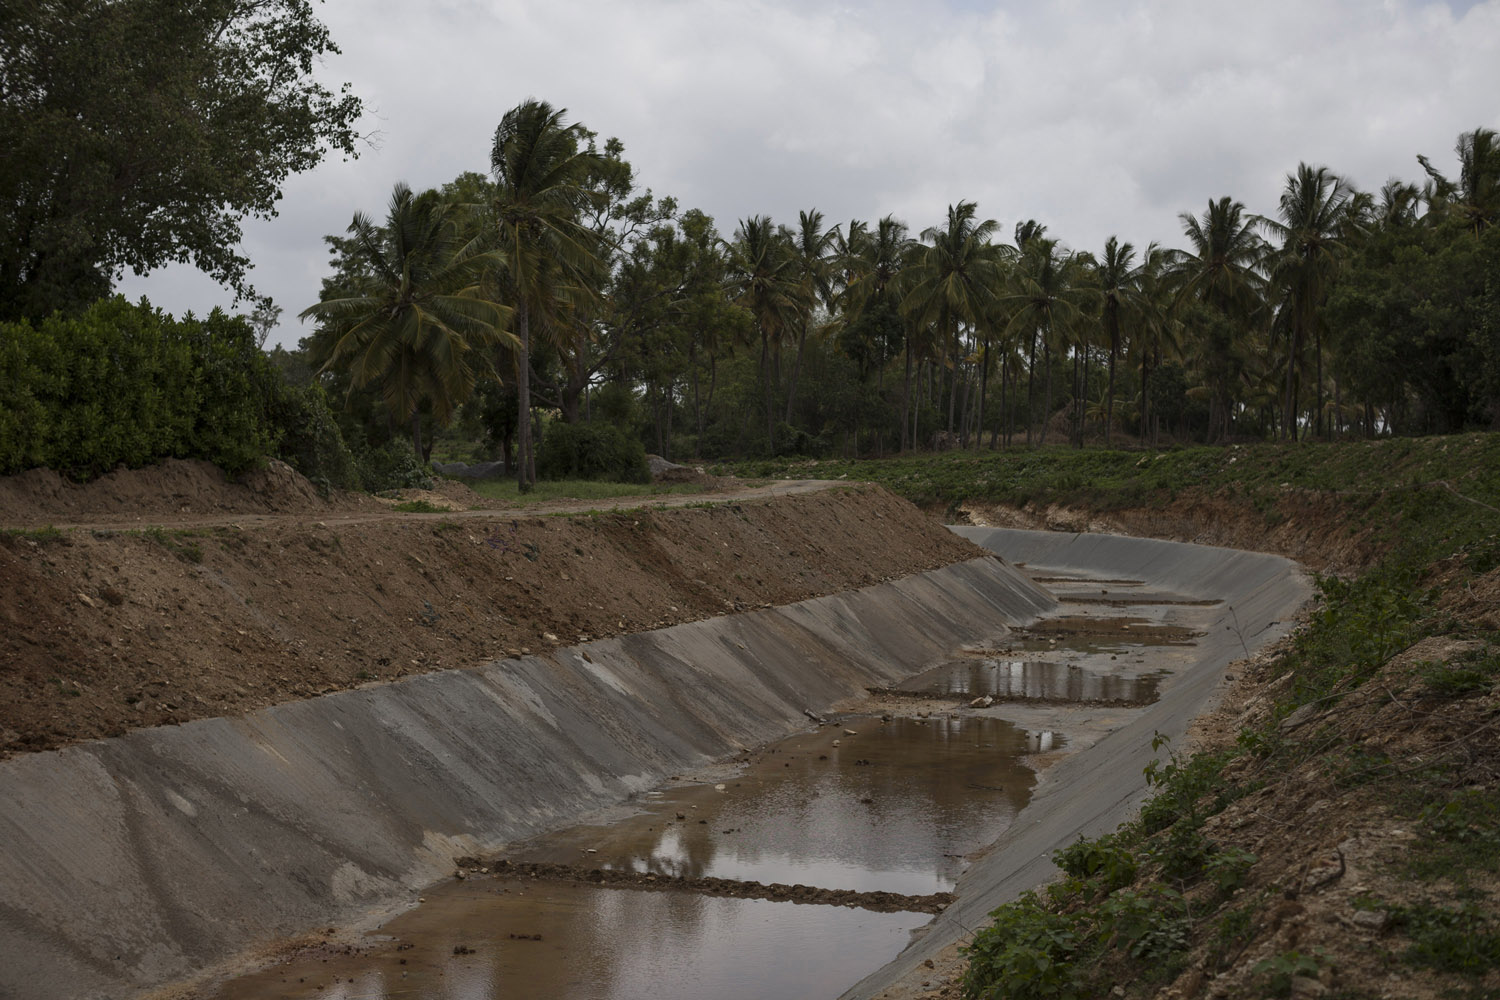 An irrigation channel from the Krishna Raja Sagara dam runs dry on a hot day in the middle of the rainy season in July 2016. Mandya district is supposed to be irrigated by the dam but as the monsoon becomes unreliable and the rains diminish every year, there simply isn't enough water for all the farmed areas [Janos Chiala/Al Jazeera]